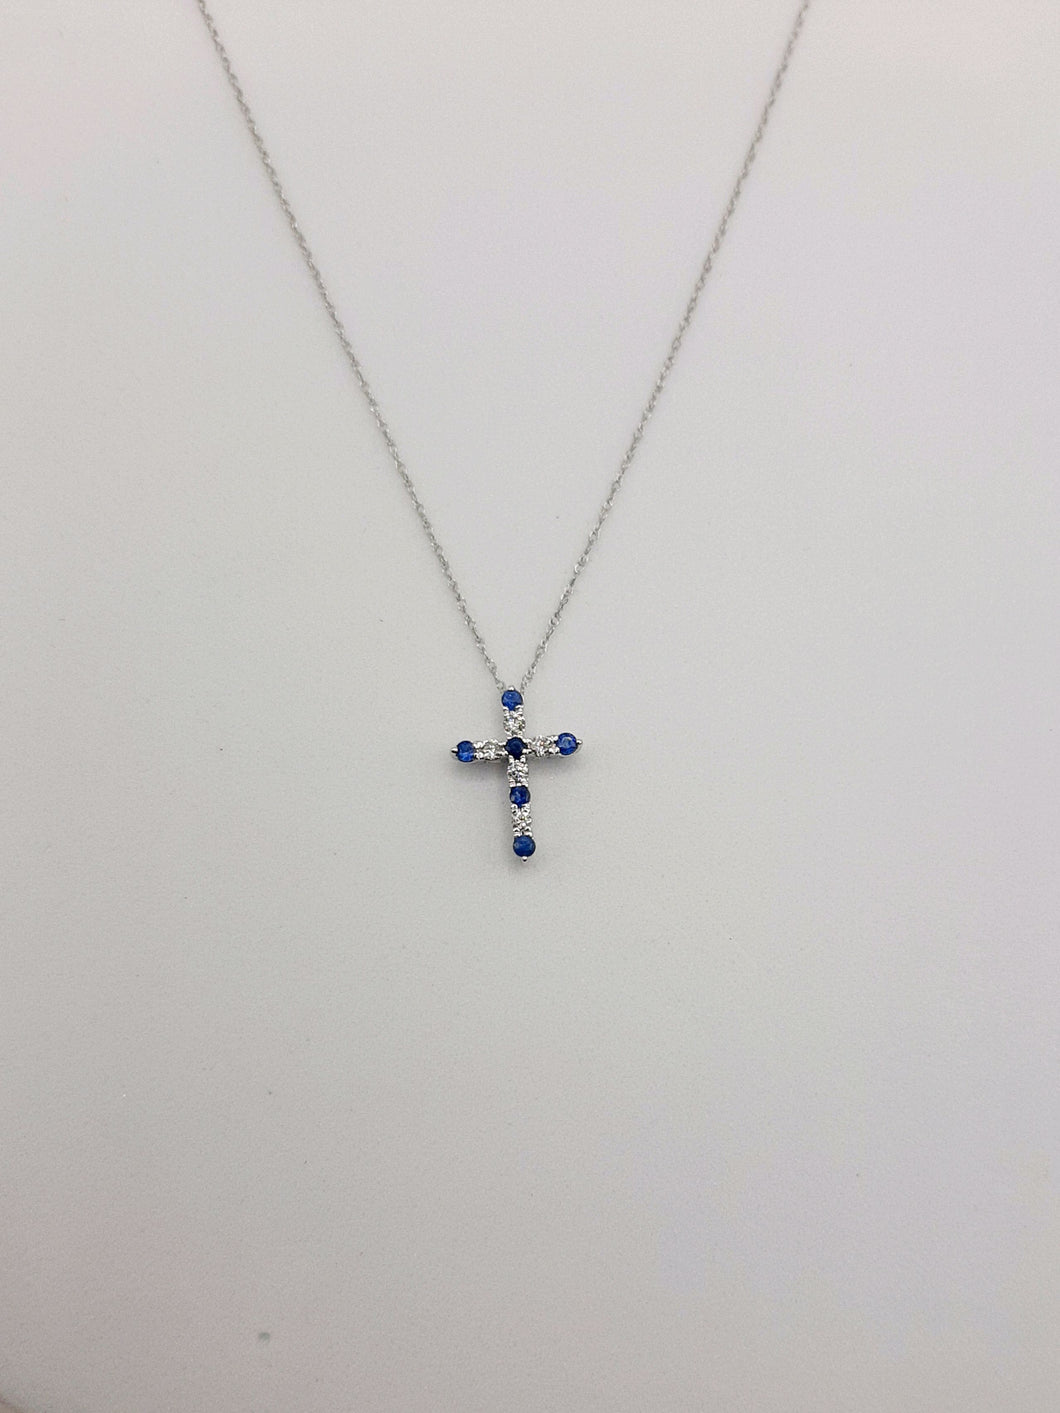 14Kt  White Gold Cross with Blue Sapphires and Natural Diamonds on 20